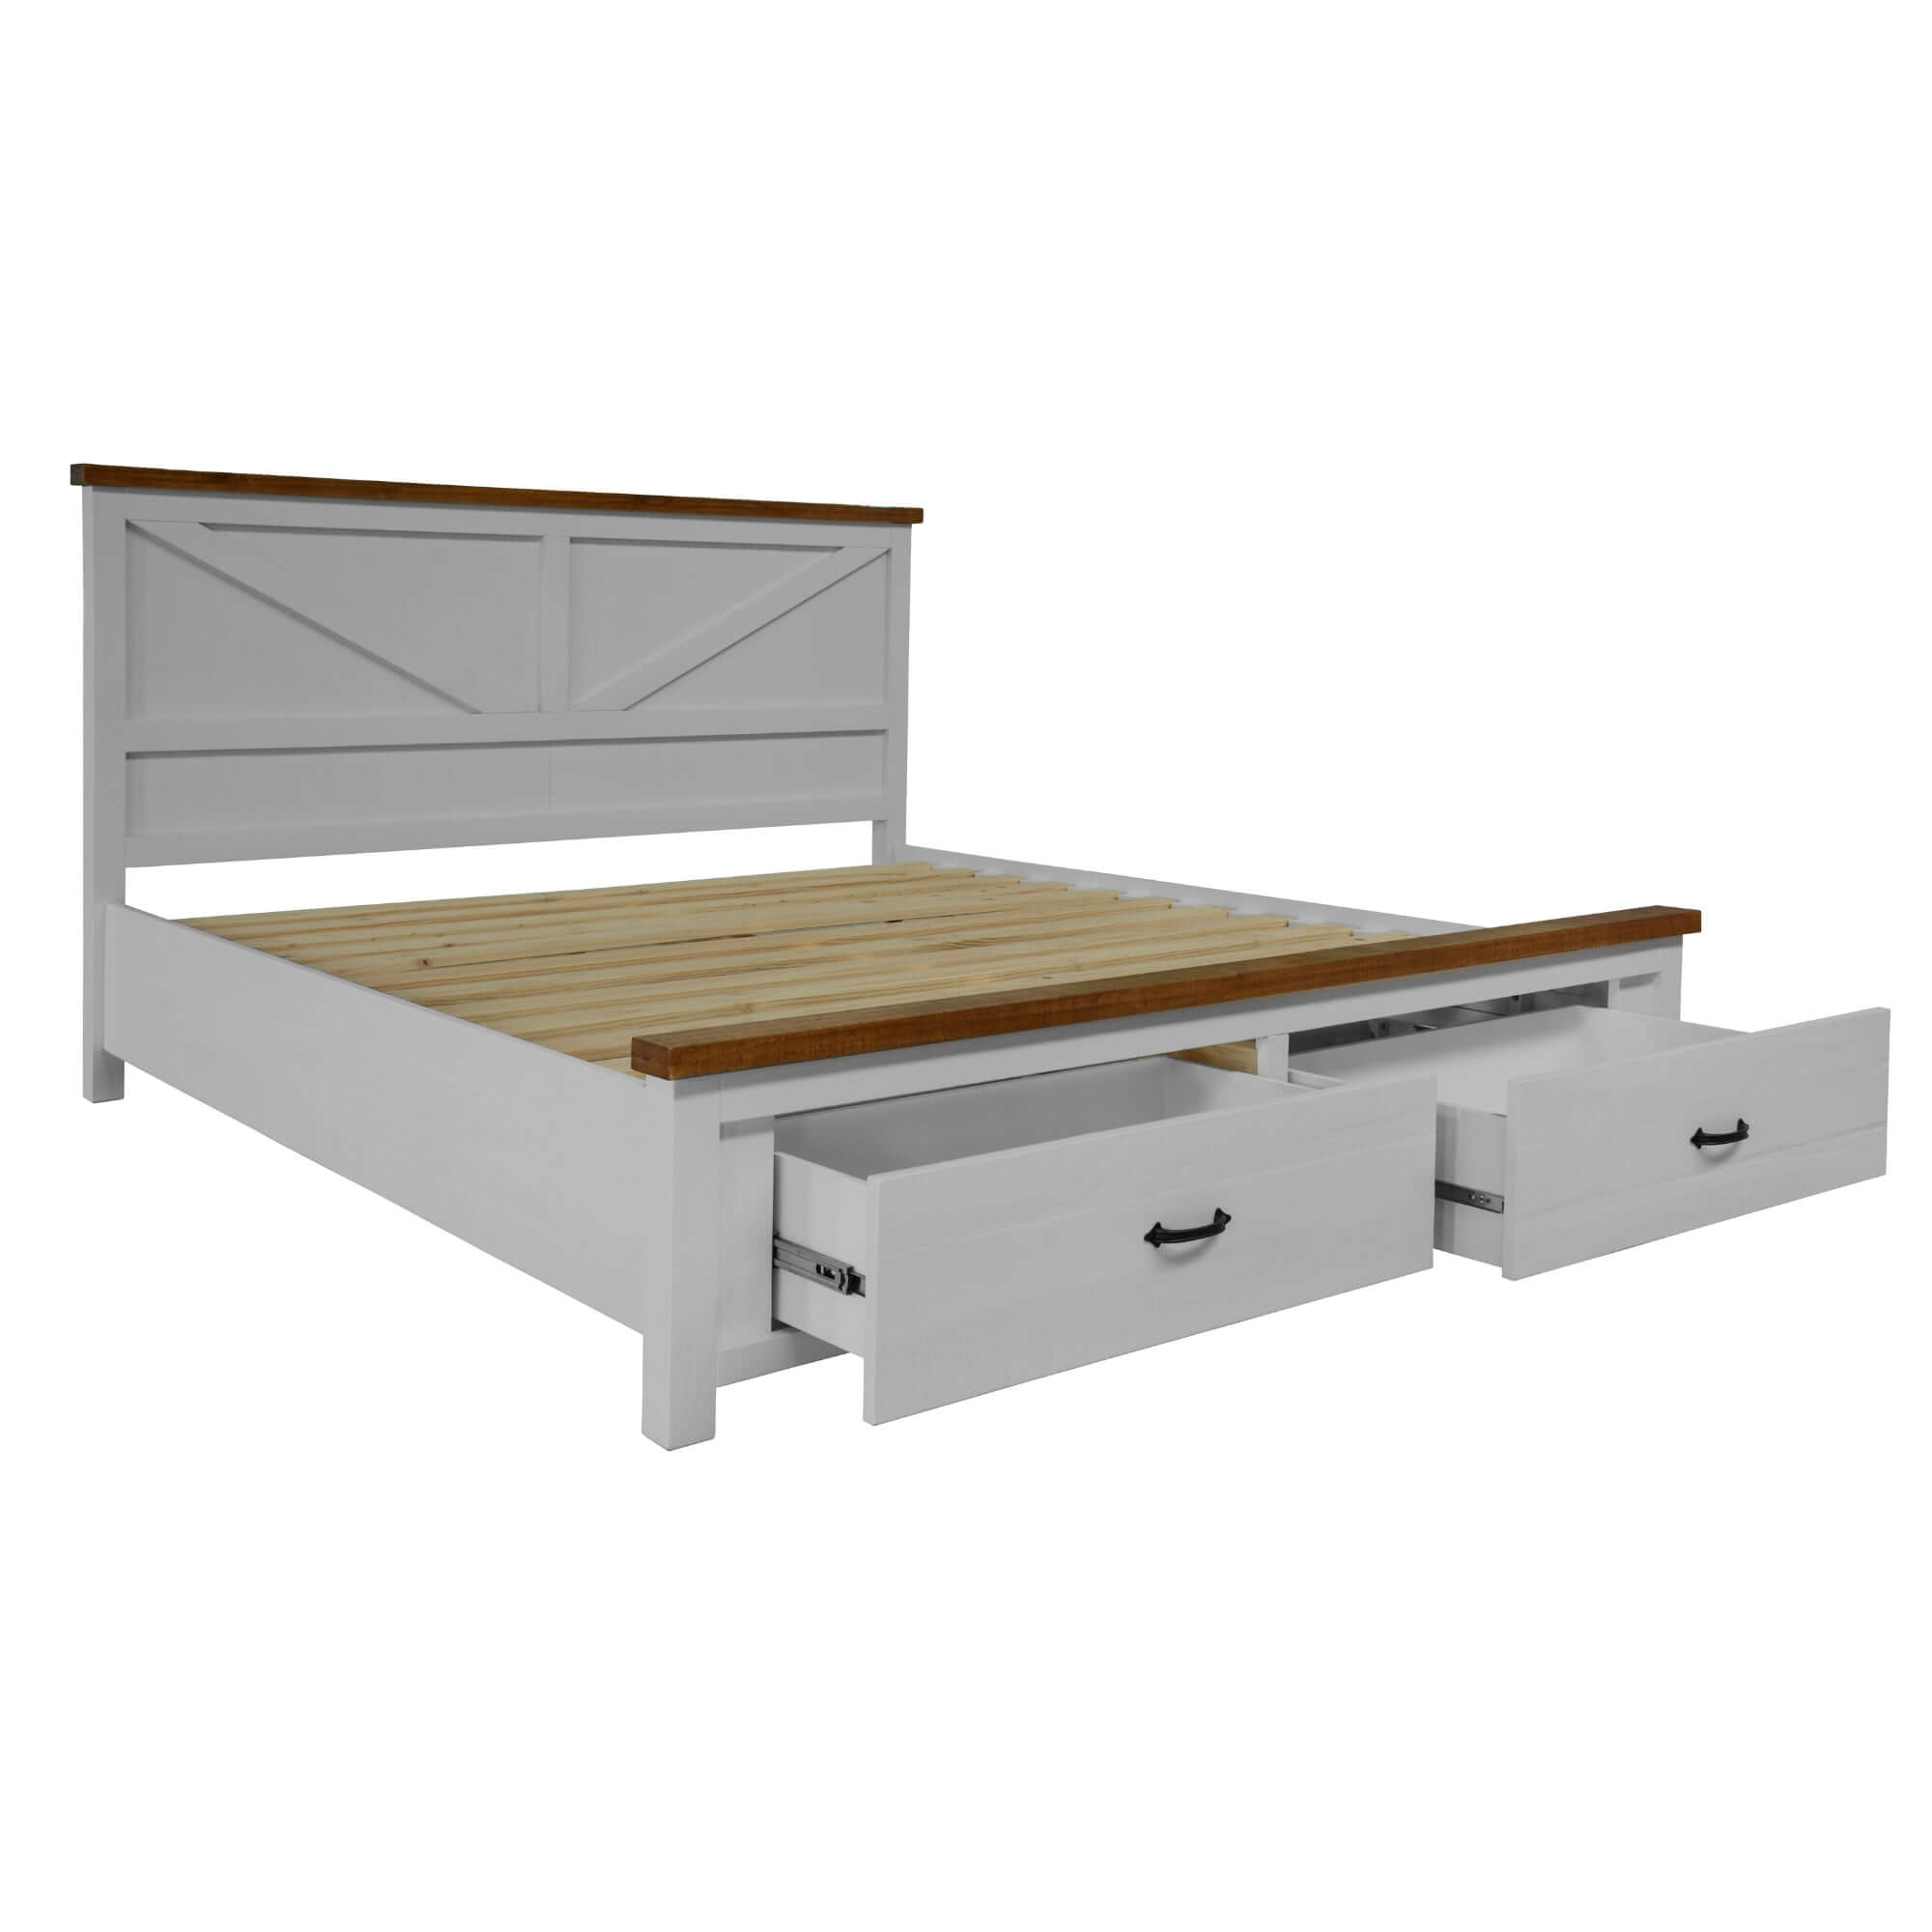 Grandy Queen Bed Frame with Storage Drawers-Upinteriors